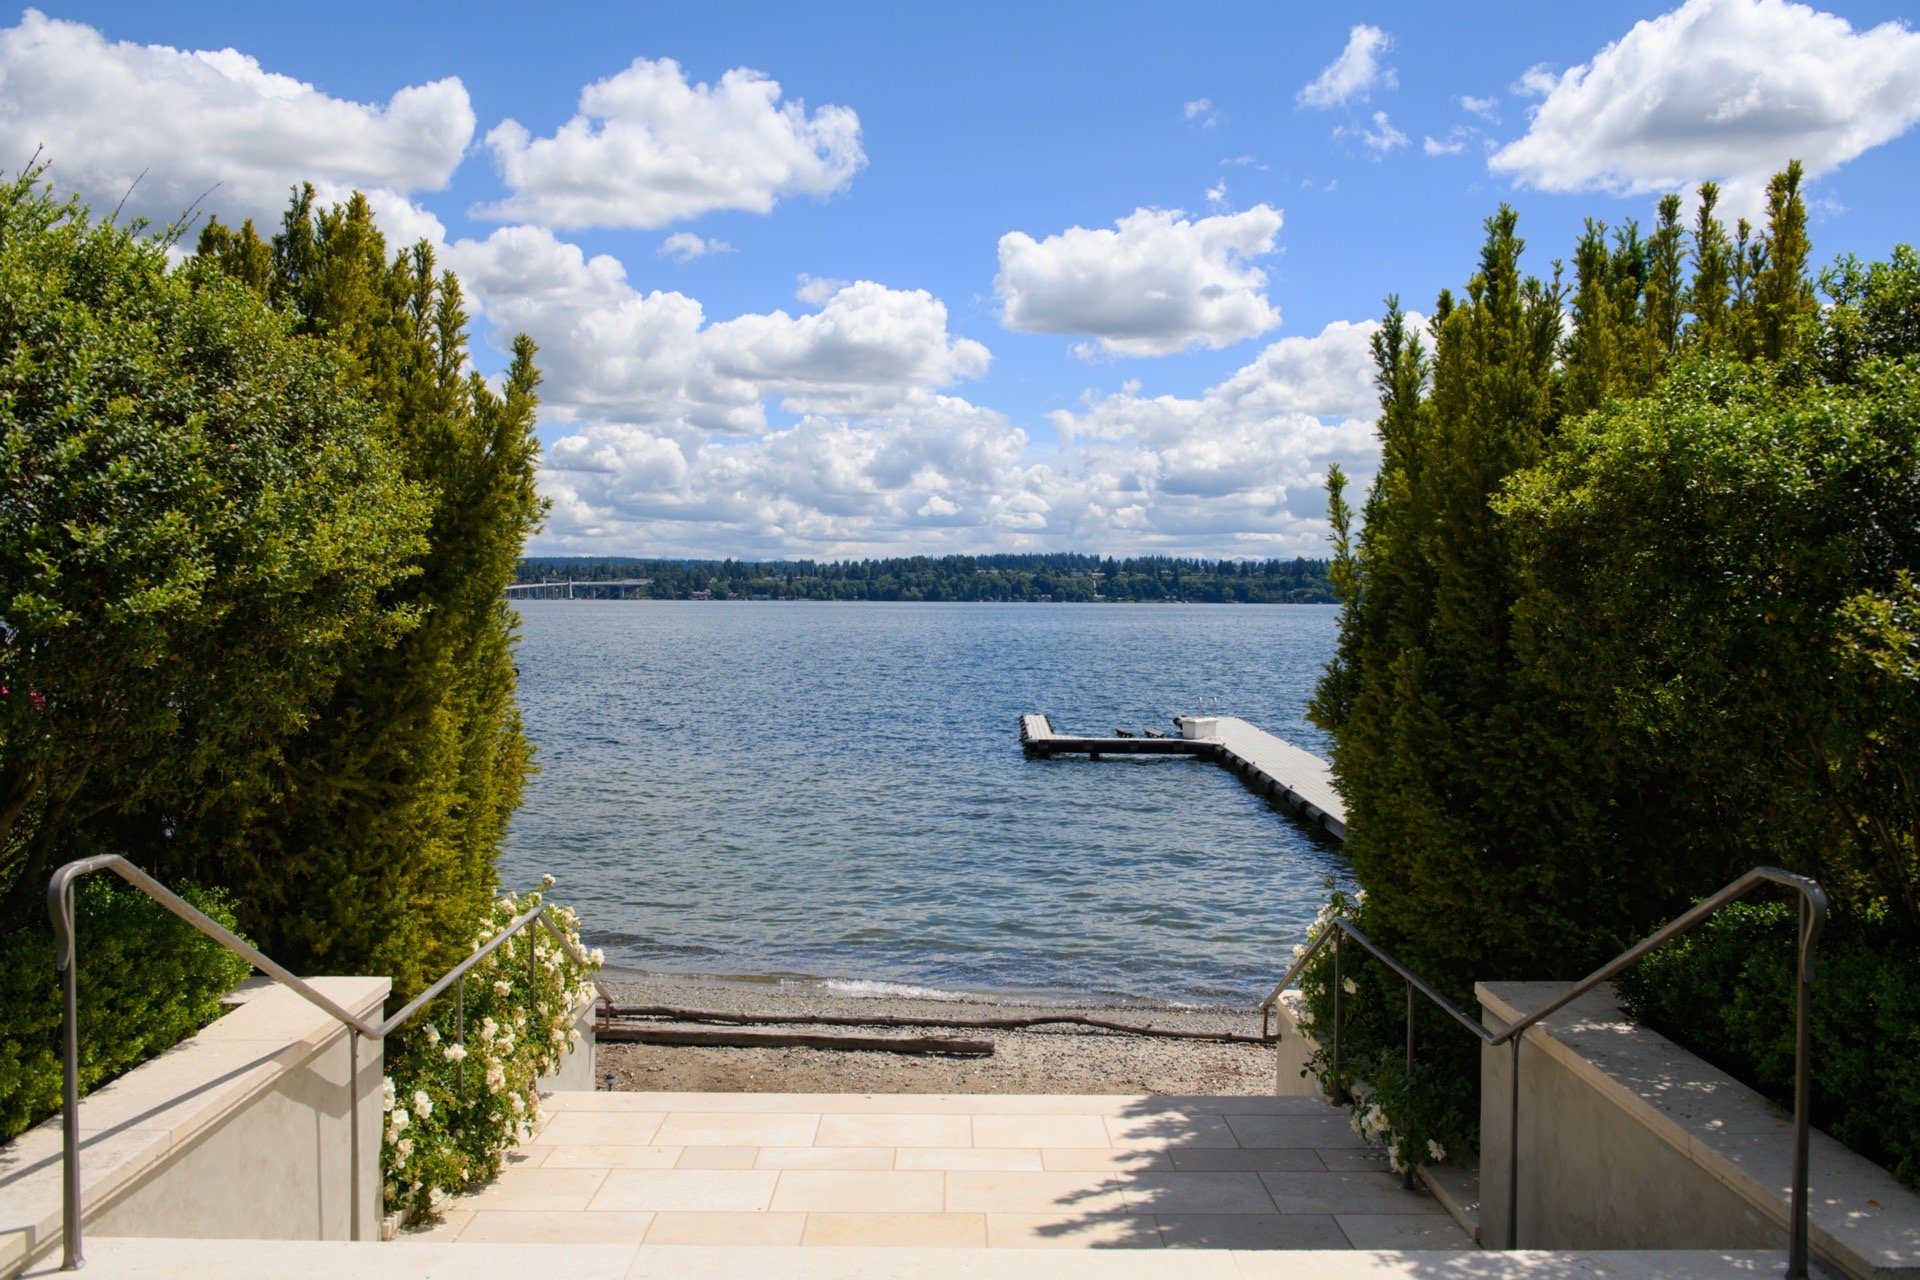 Francis York Waterfront Mansion in Seattle’s Exclusive Enclave, The Reed Estate 15.jpg